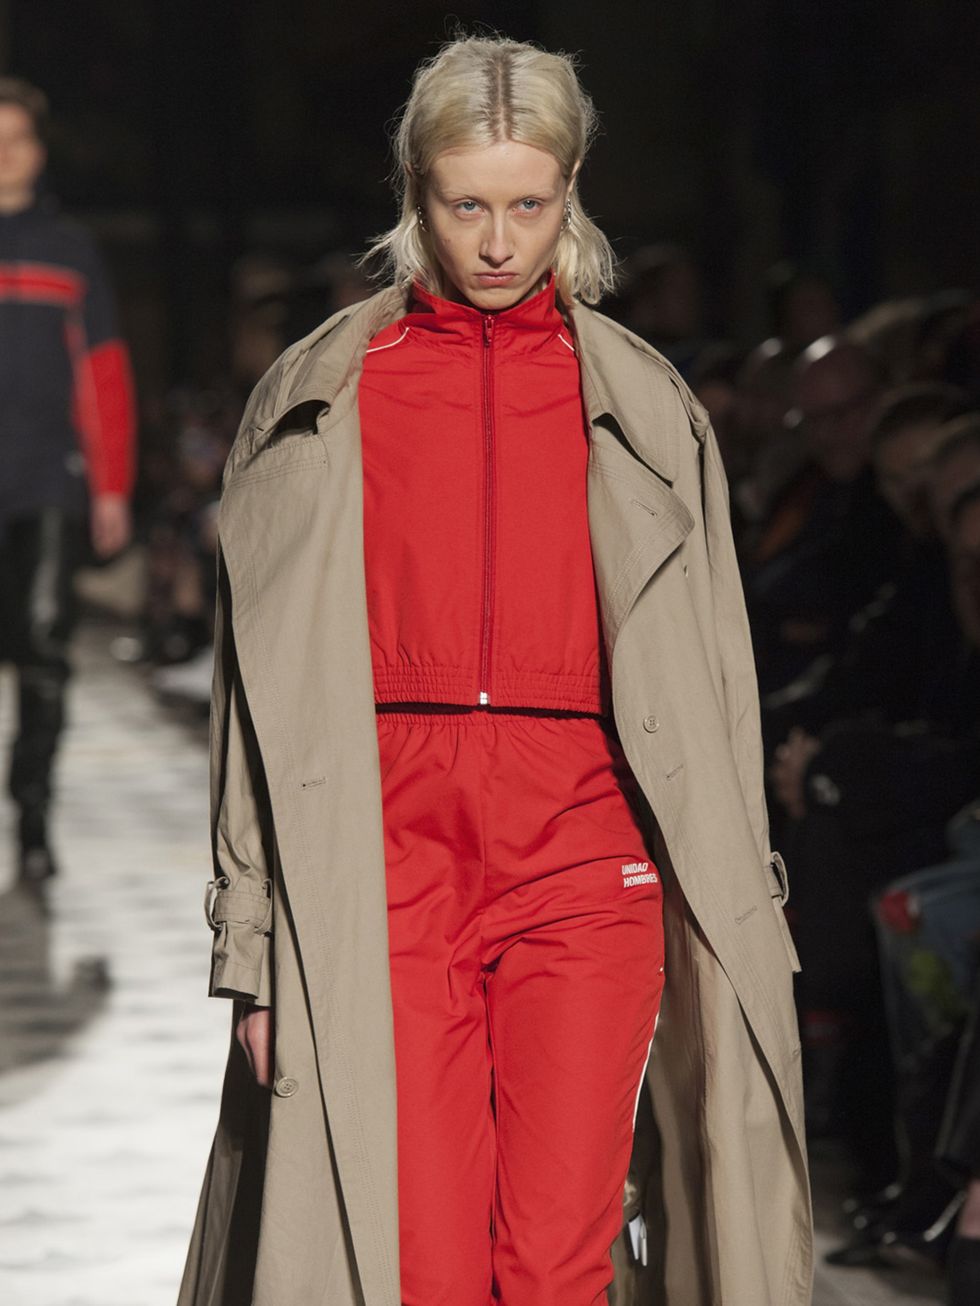 Lip, Jacket, Winter, Fashion show, Textile, Red, Outerwear, Style, Runway, Coat, 